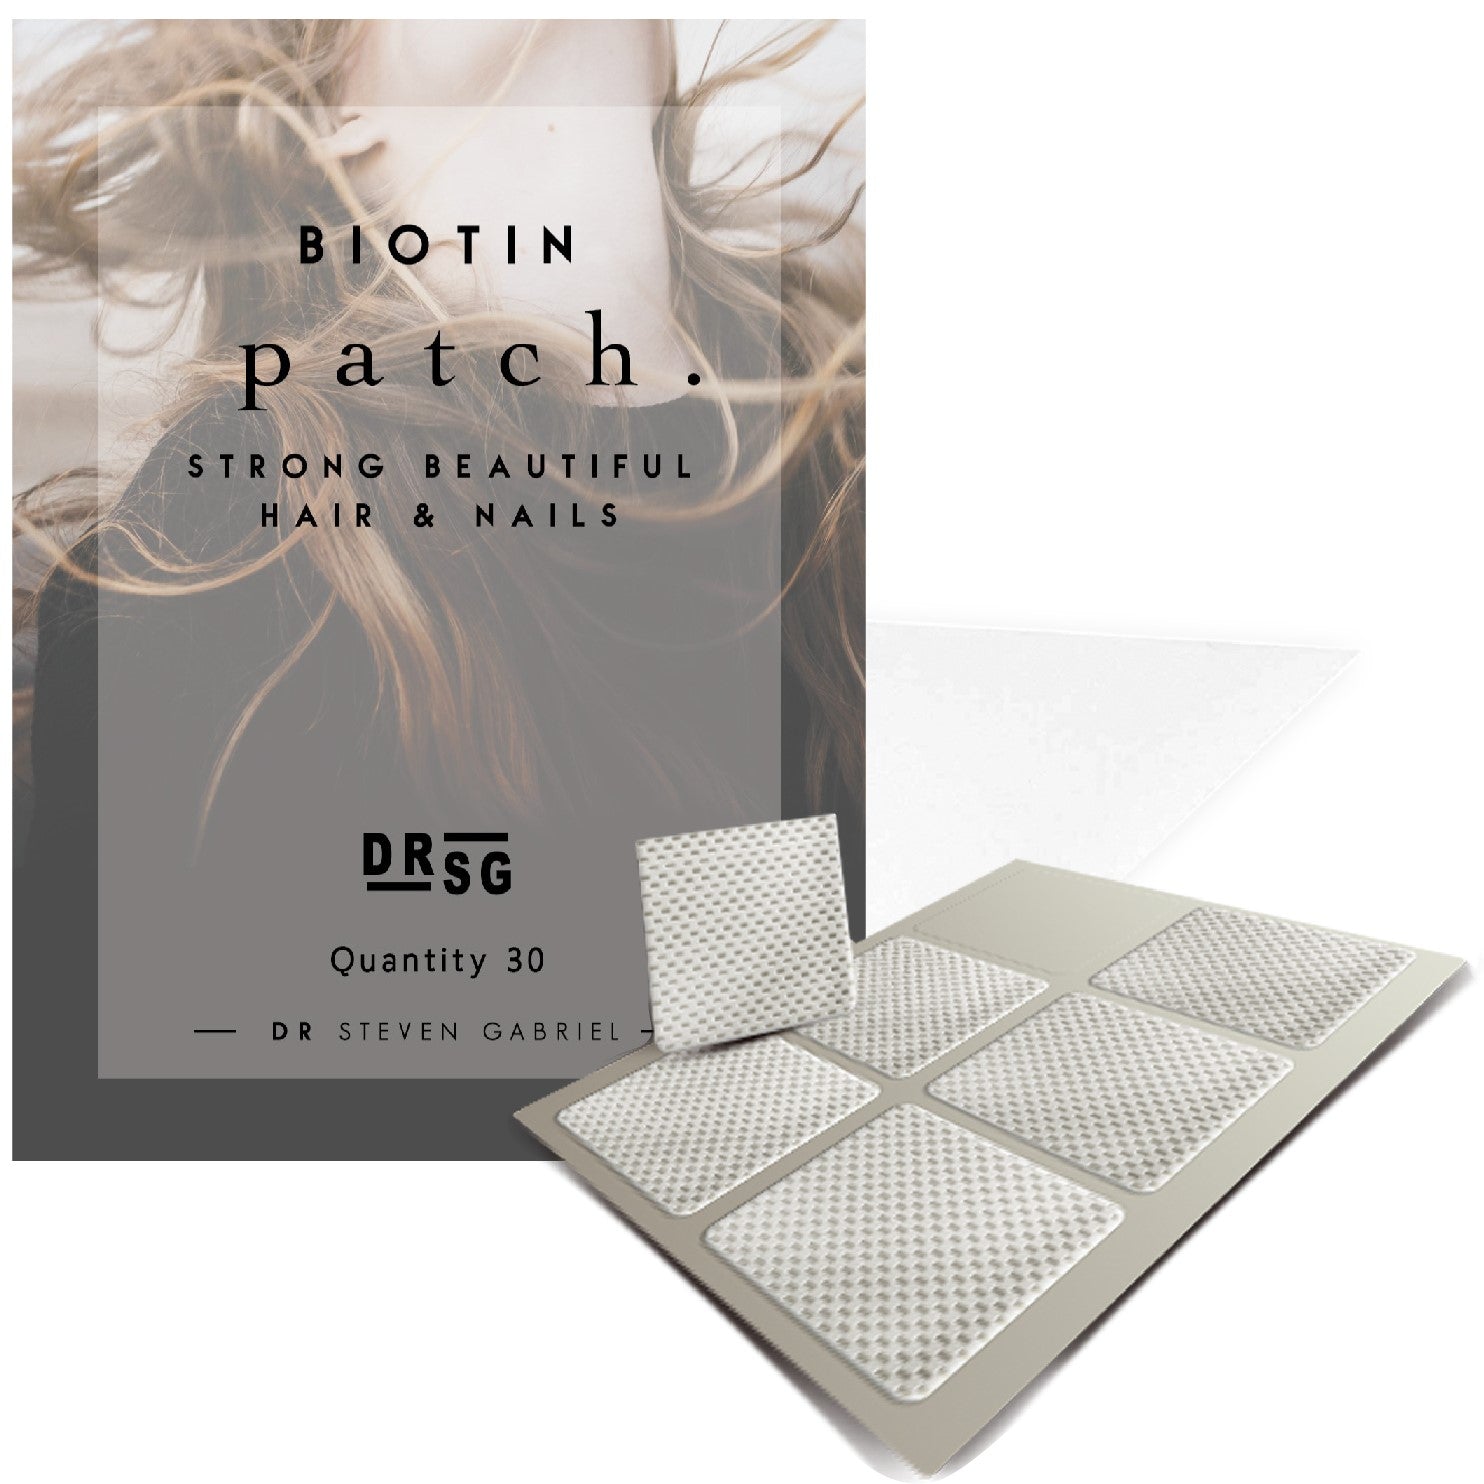 DRSG Biotin Topical patch (30 patches)